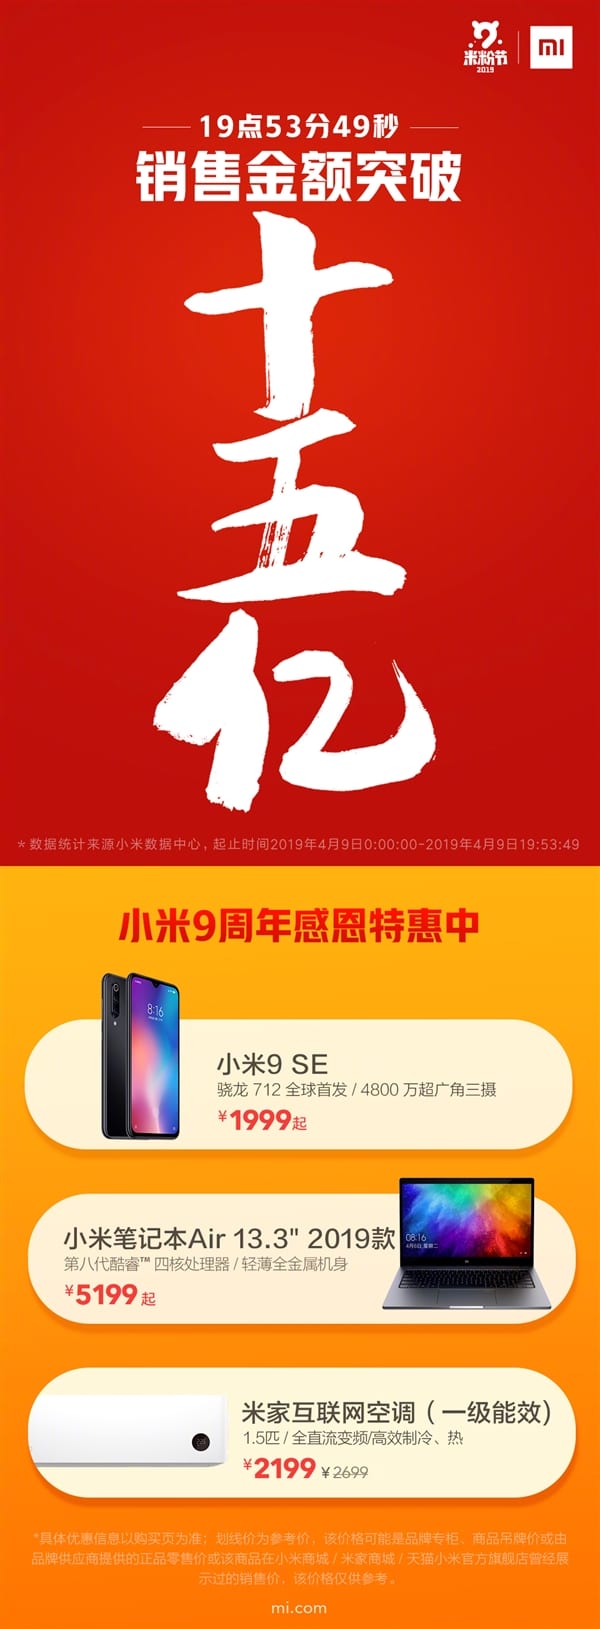 Xiaomi record sales of 1.5 billion on anniversery